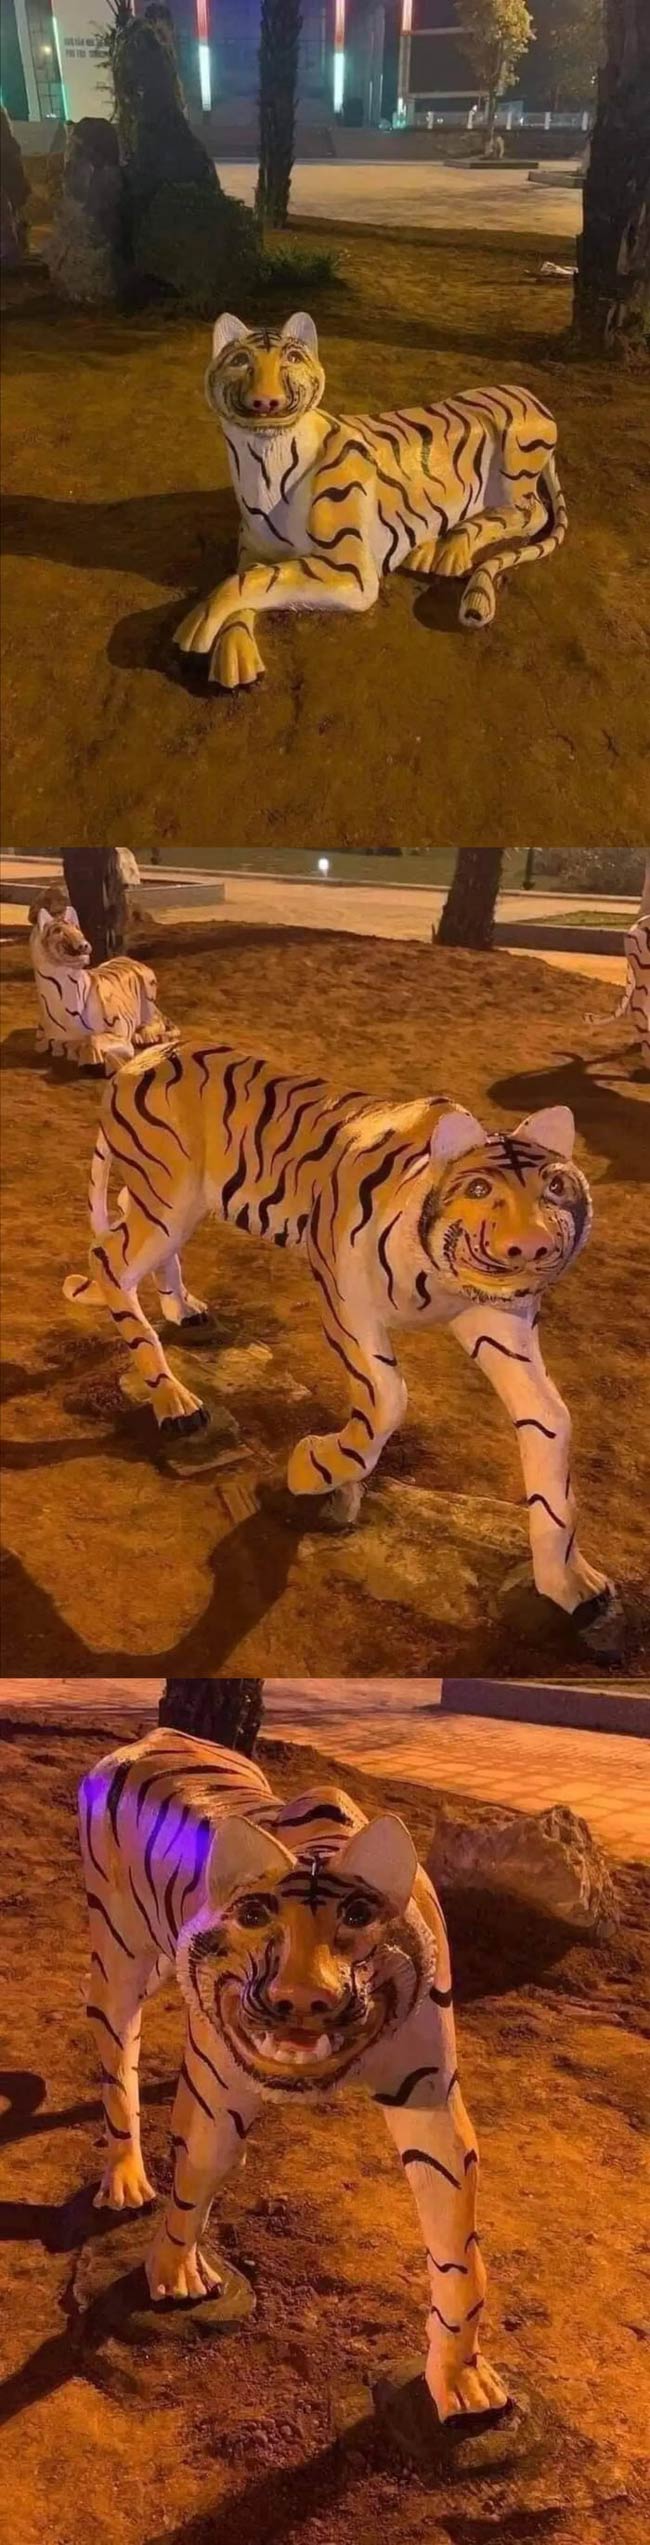 You know what tigers look like, right?